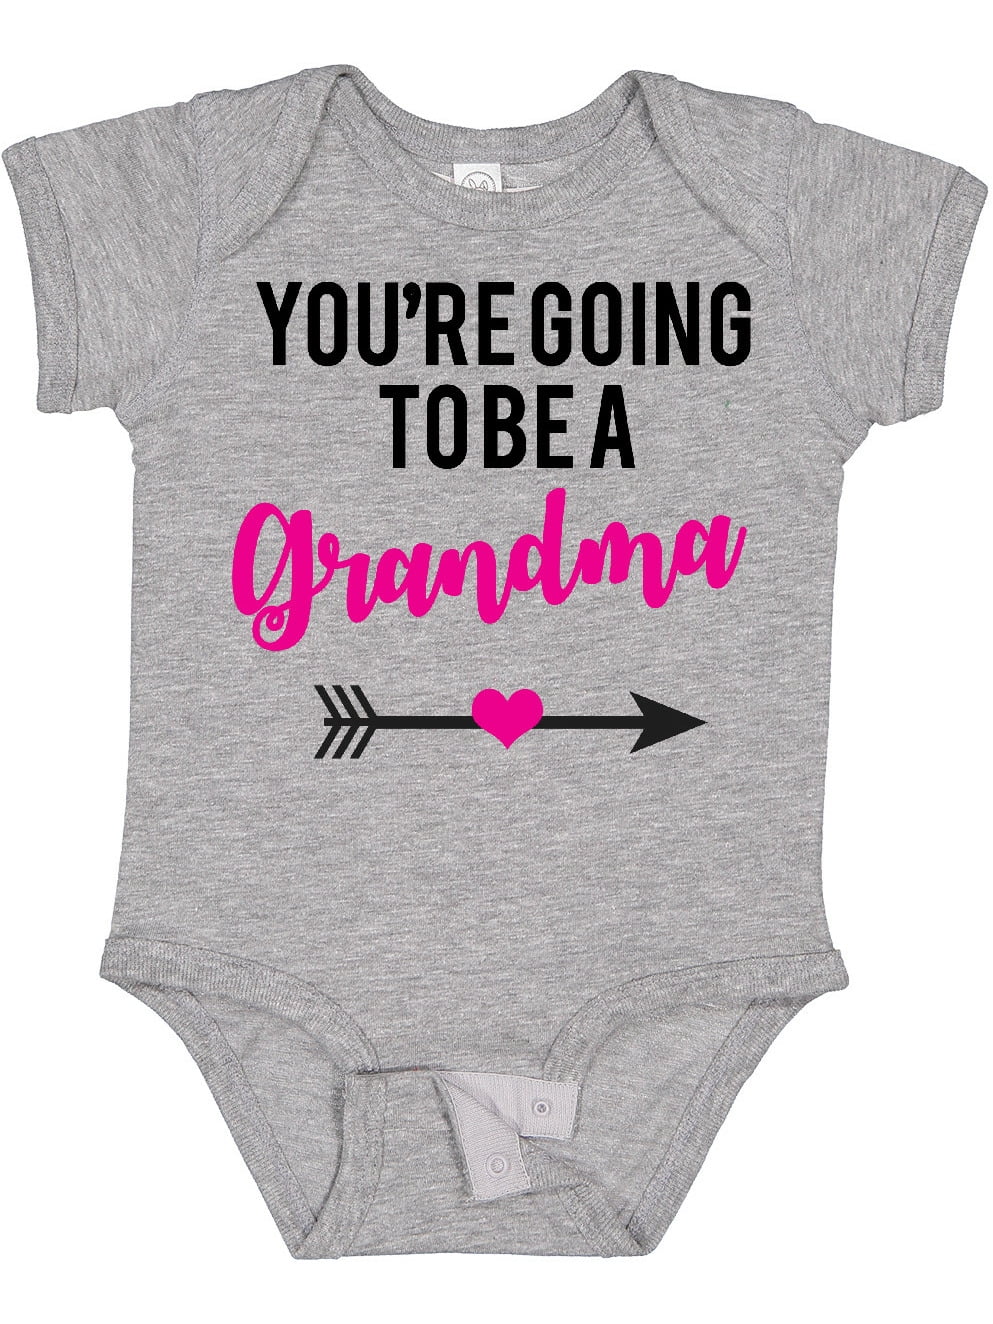 Surprise New Baby Announce for Grandparent and Family Great Grandma Announcement Gifts Promoted to Great Grandma Infant Bodysuit 0-3 mo, Natural Pregnancy Announcement Gift for Great Grandma 